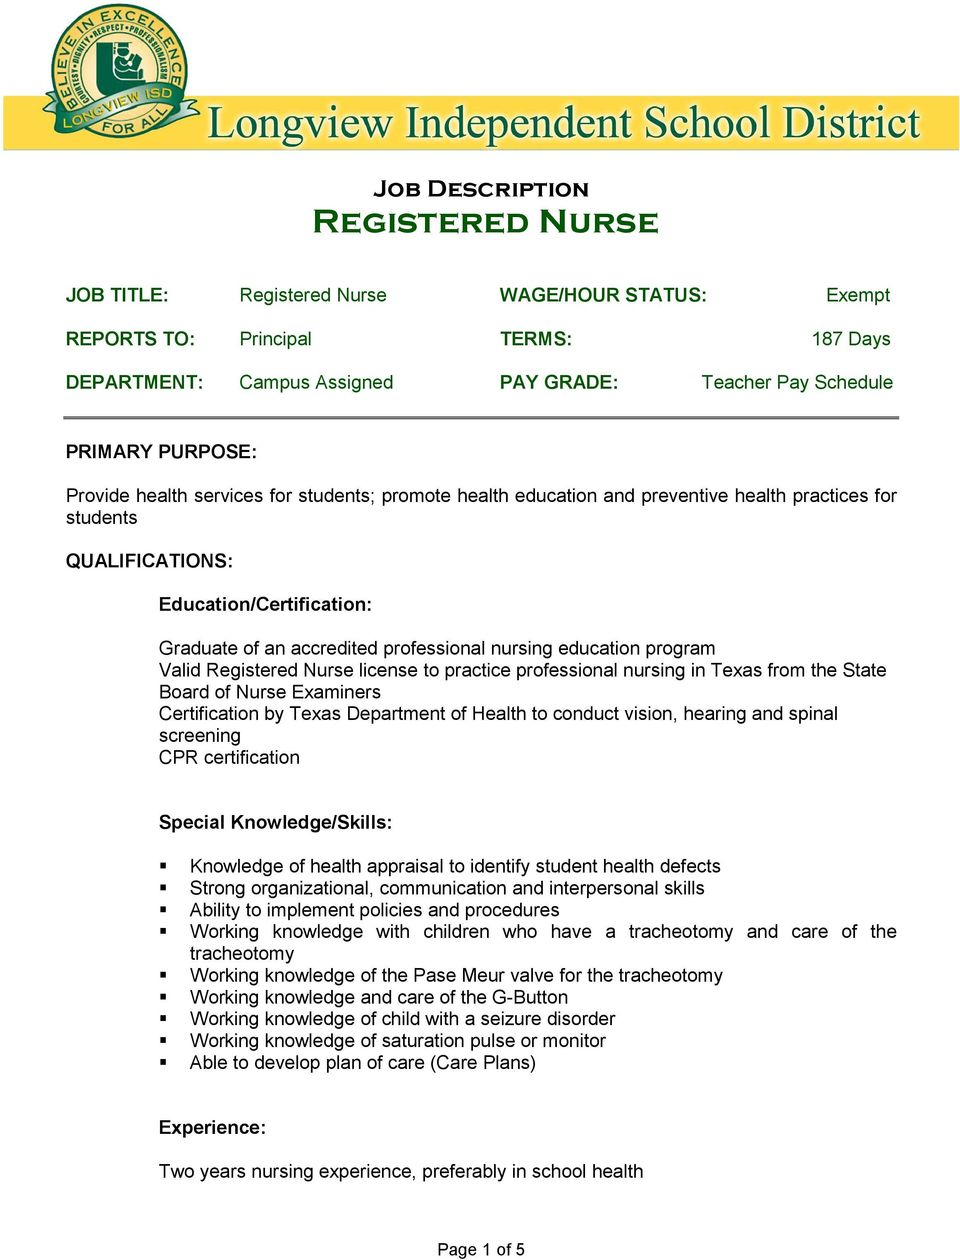 professional nursing in Texas from the State Board of Nurse Examiners Certification by Texas Department of Health to conduct vision, hearing and spinal screening CPR certification Special